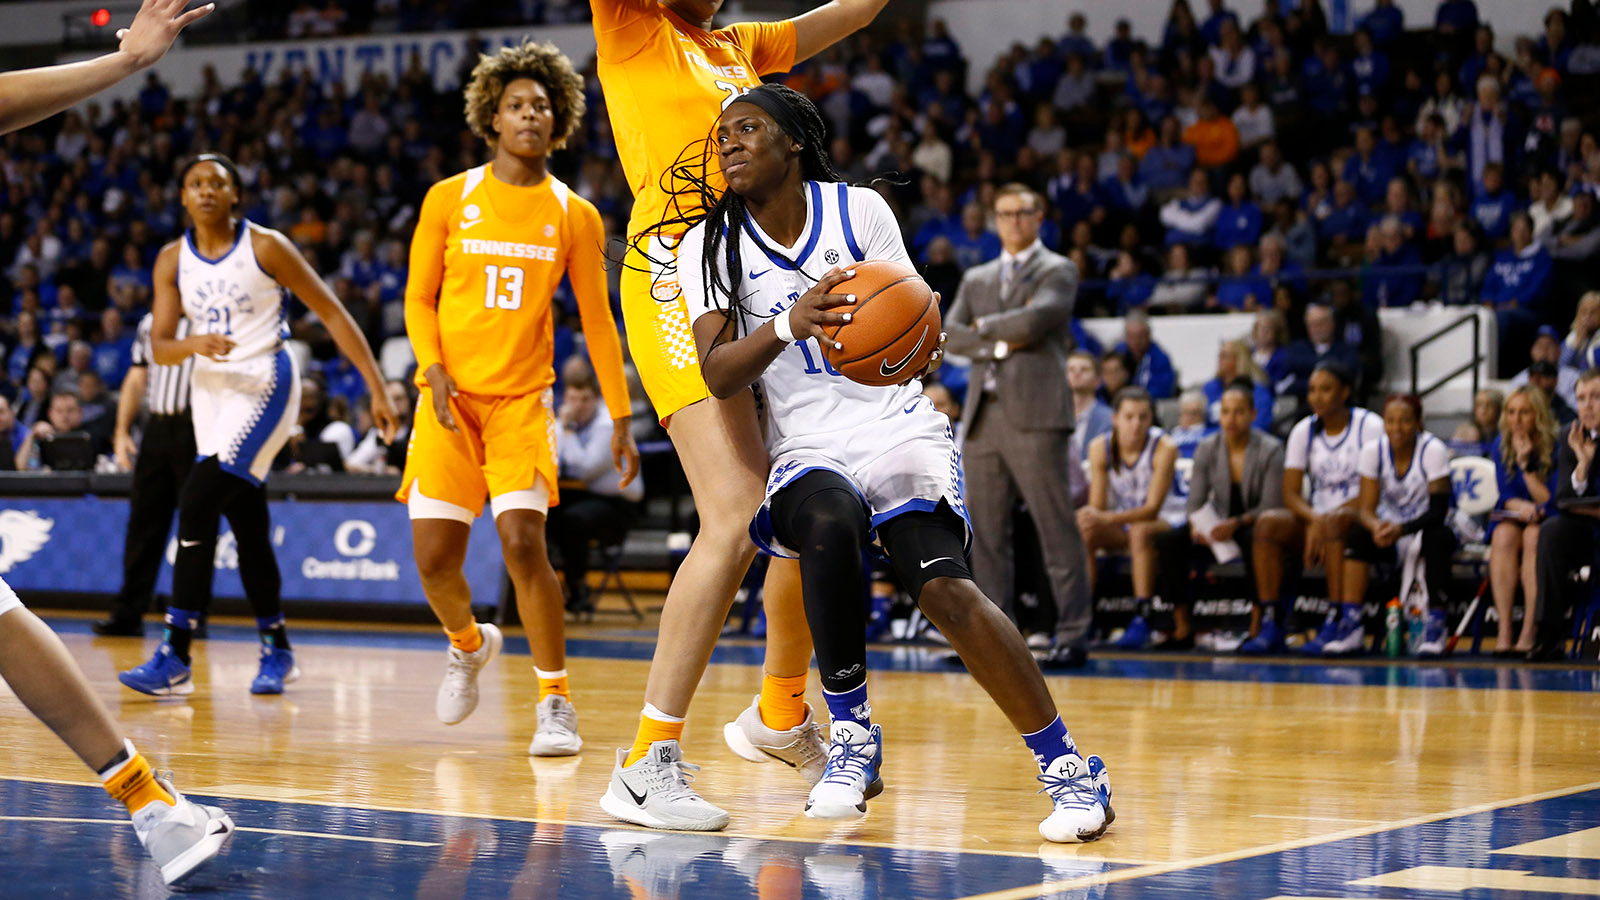 Howard's Career Day Leads No. 13 Kentucky Past No. 22 Tennessee